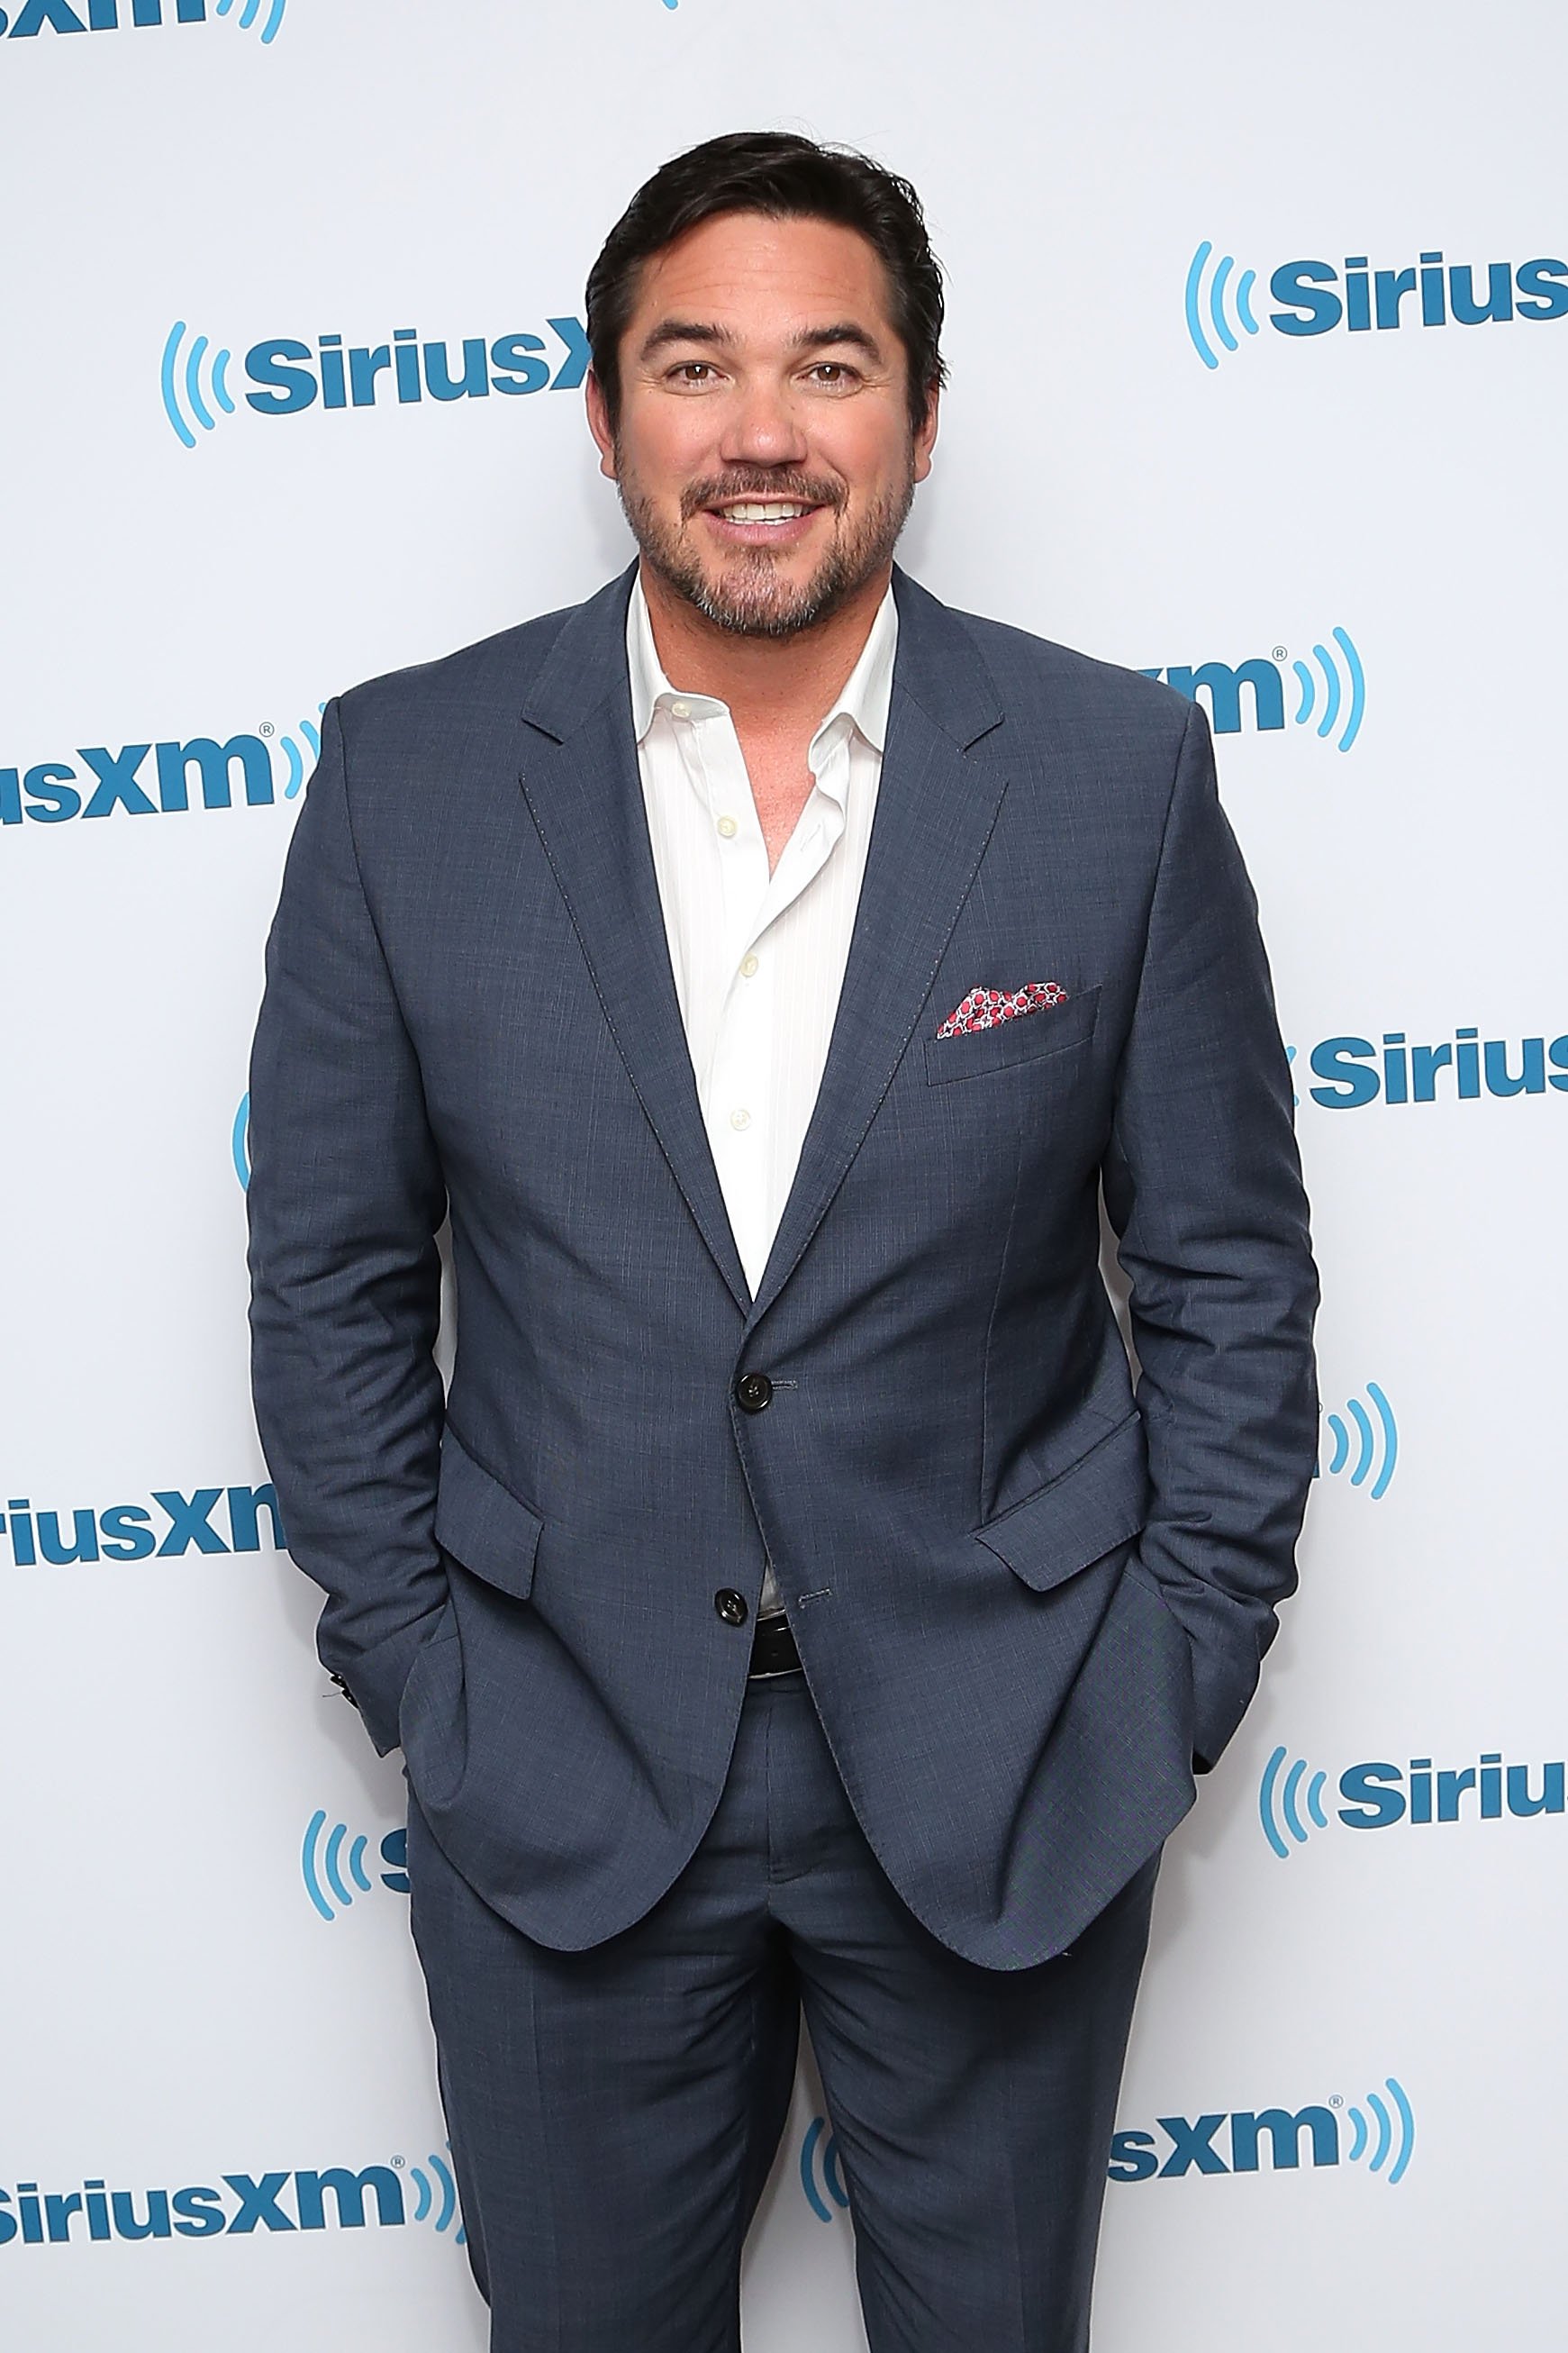 Actor Dean Cain visits the SiriusXM Studios on April 25, 2014 in New York City. | Source: Getty Images